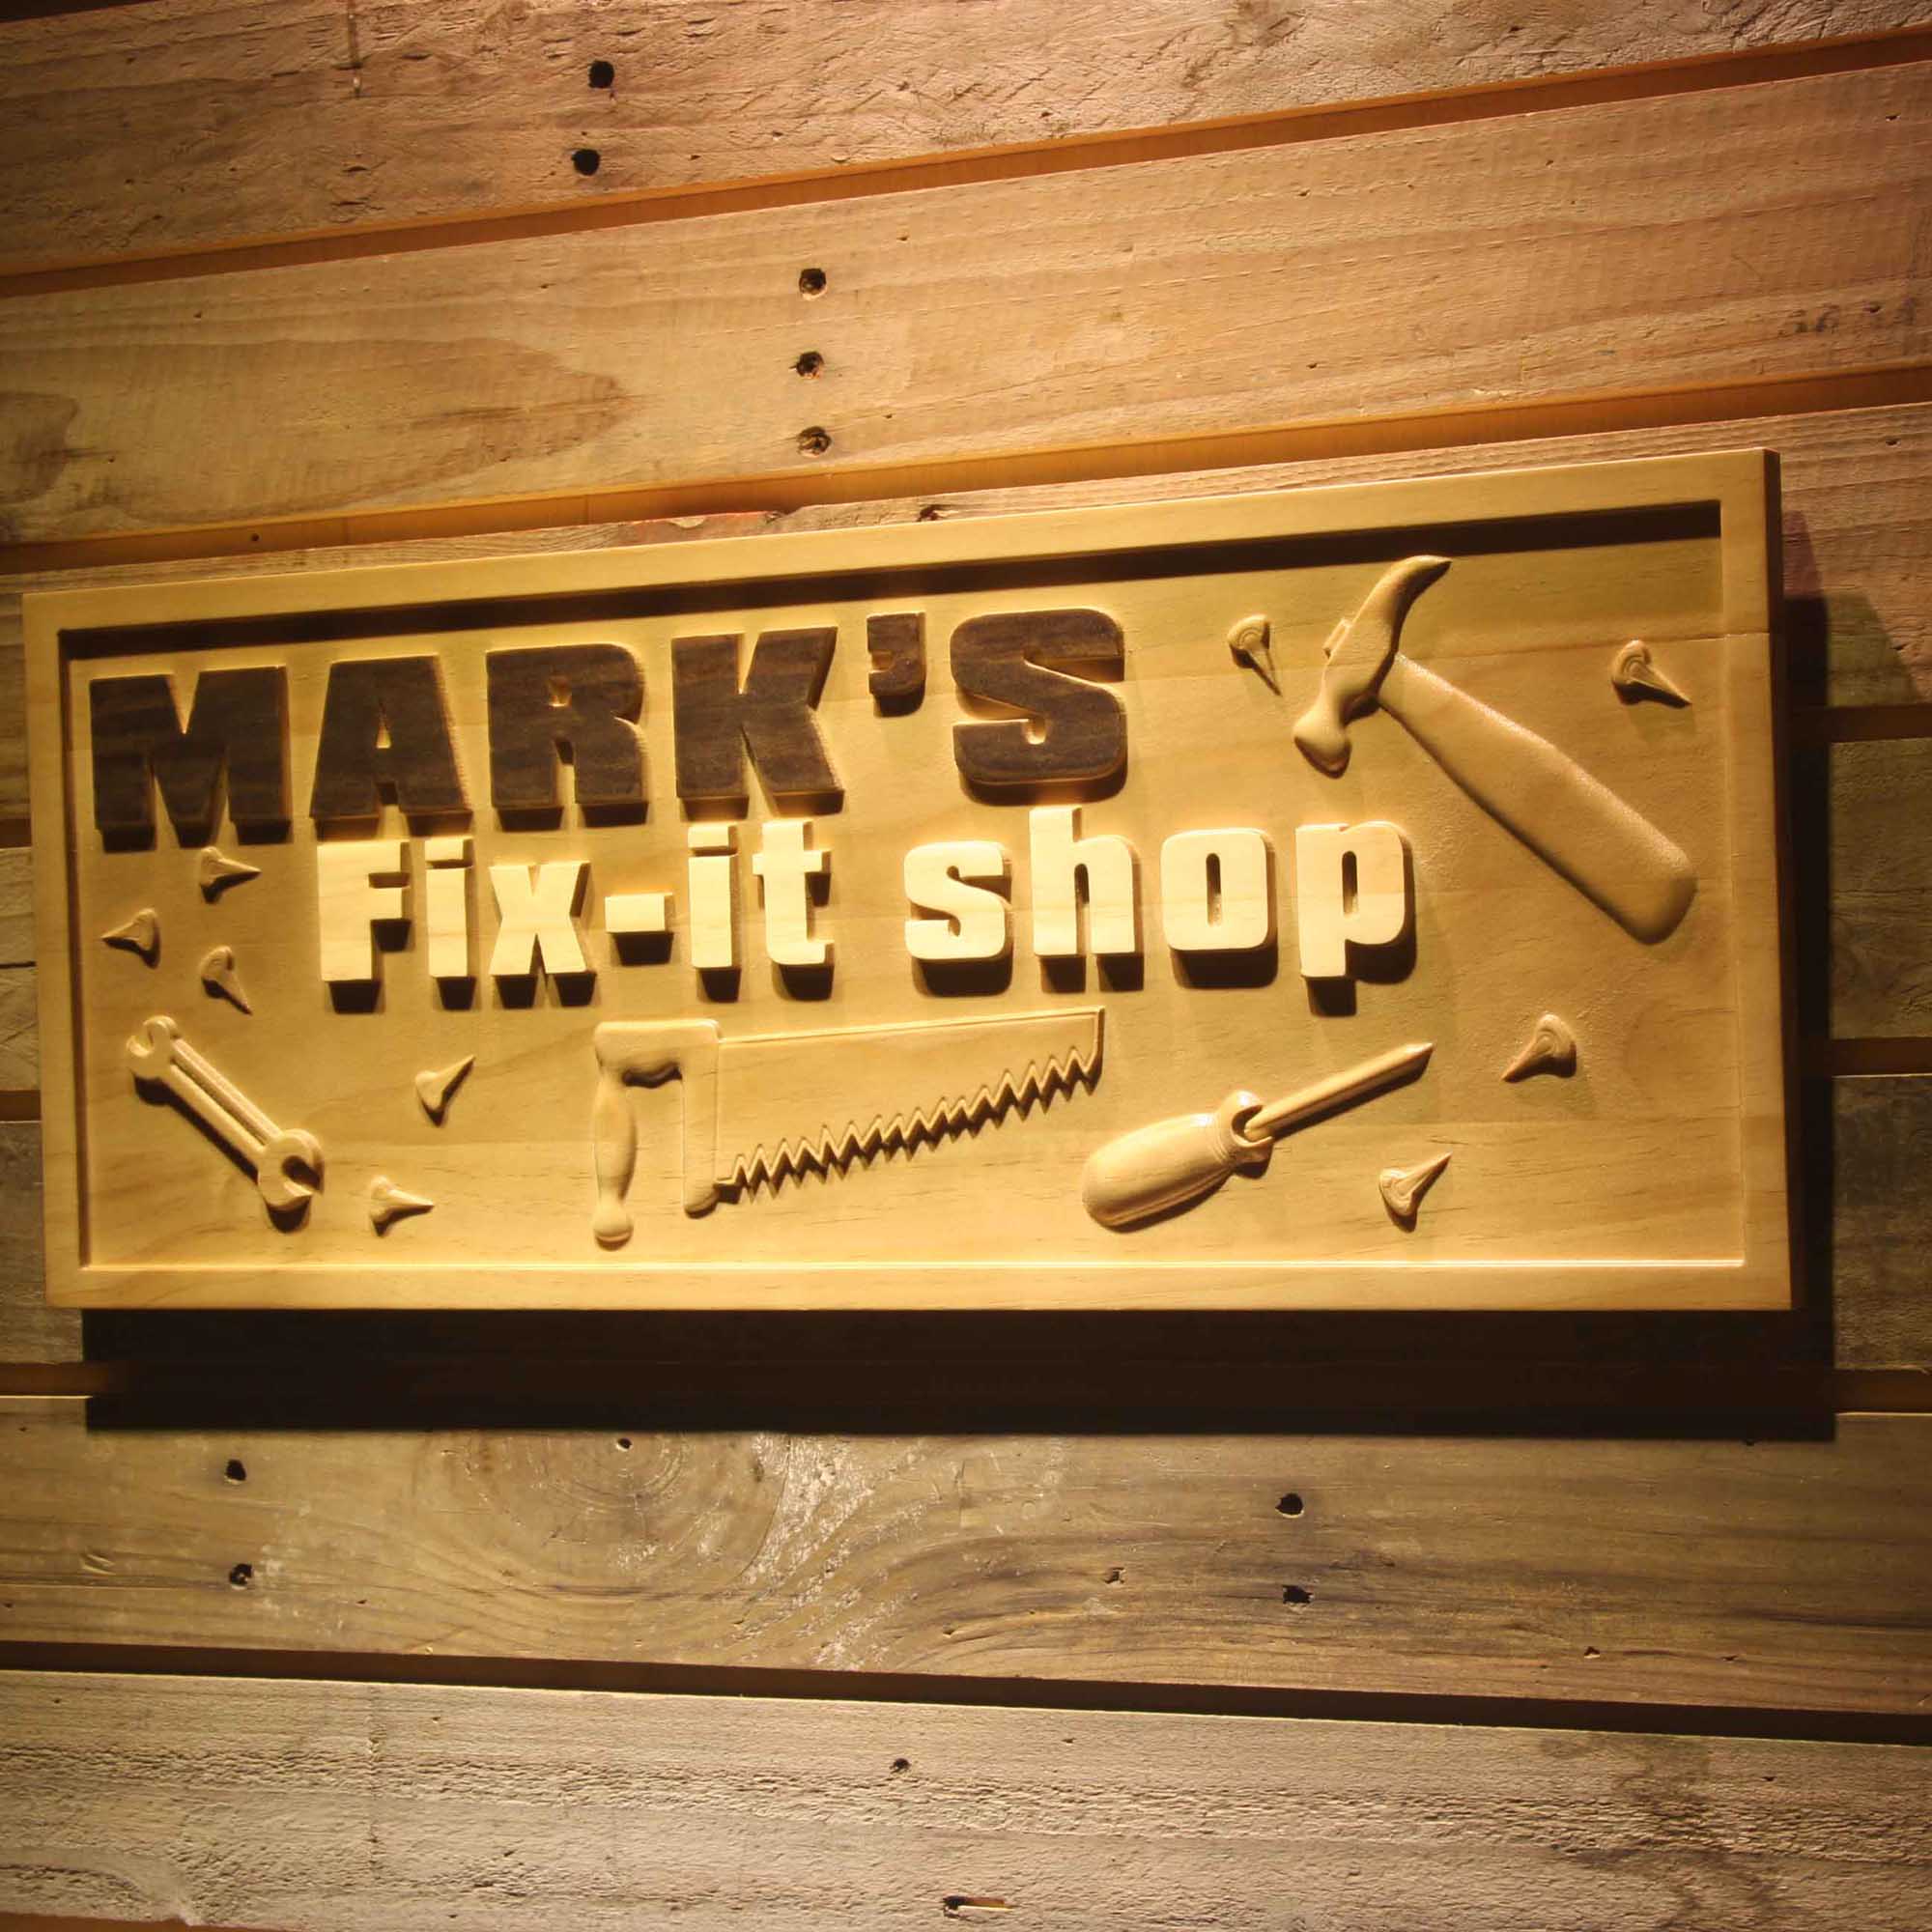 Personalized FIX IT Shop Tools Hammer Saw Garage Den Wood Engraved Wooden Sign